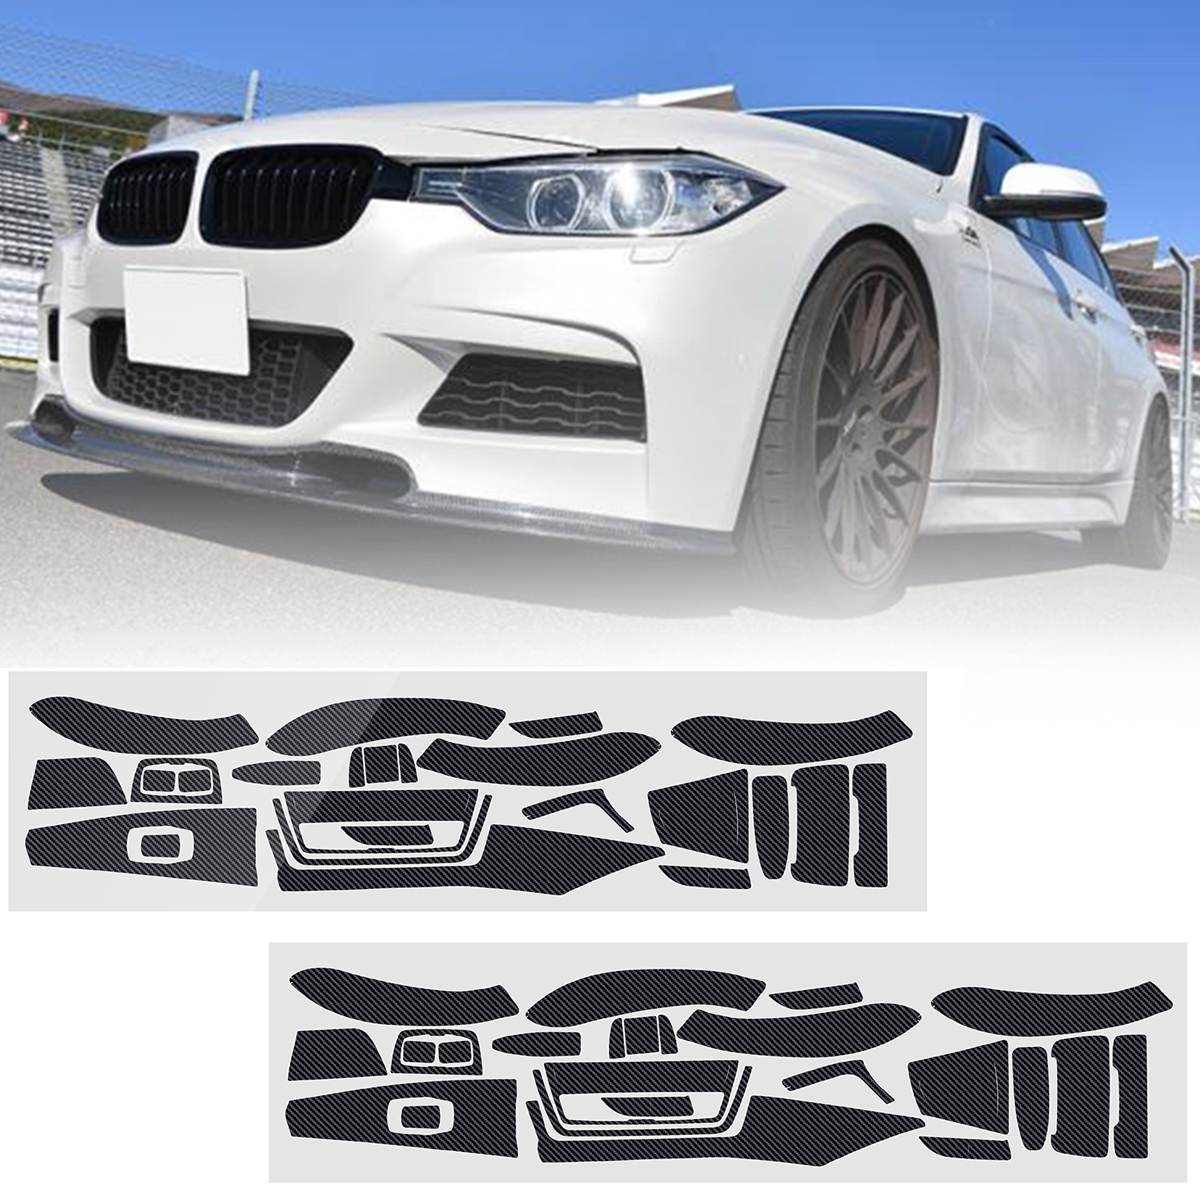 

Carbon Fiber Pattern Car Interior Dashboard Sticker Wrap Decoration Right Hand Driving for BMW 3-Series F30 F31 F35 2001-2017